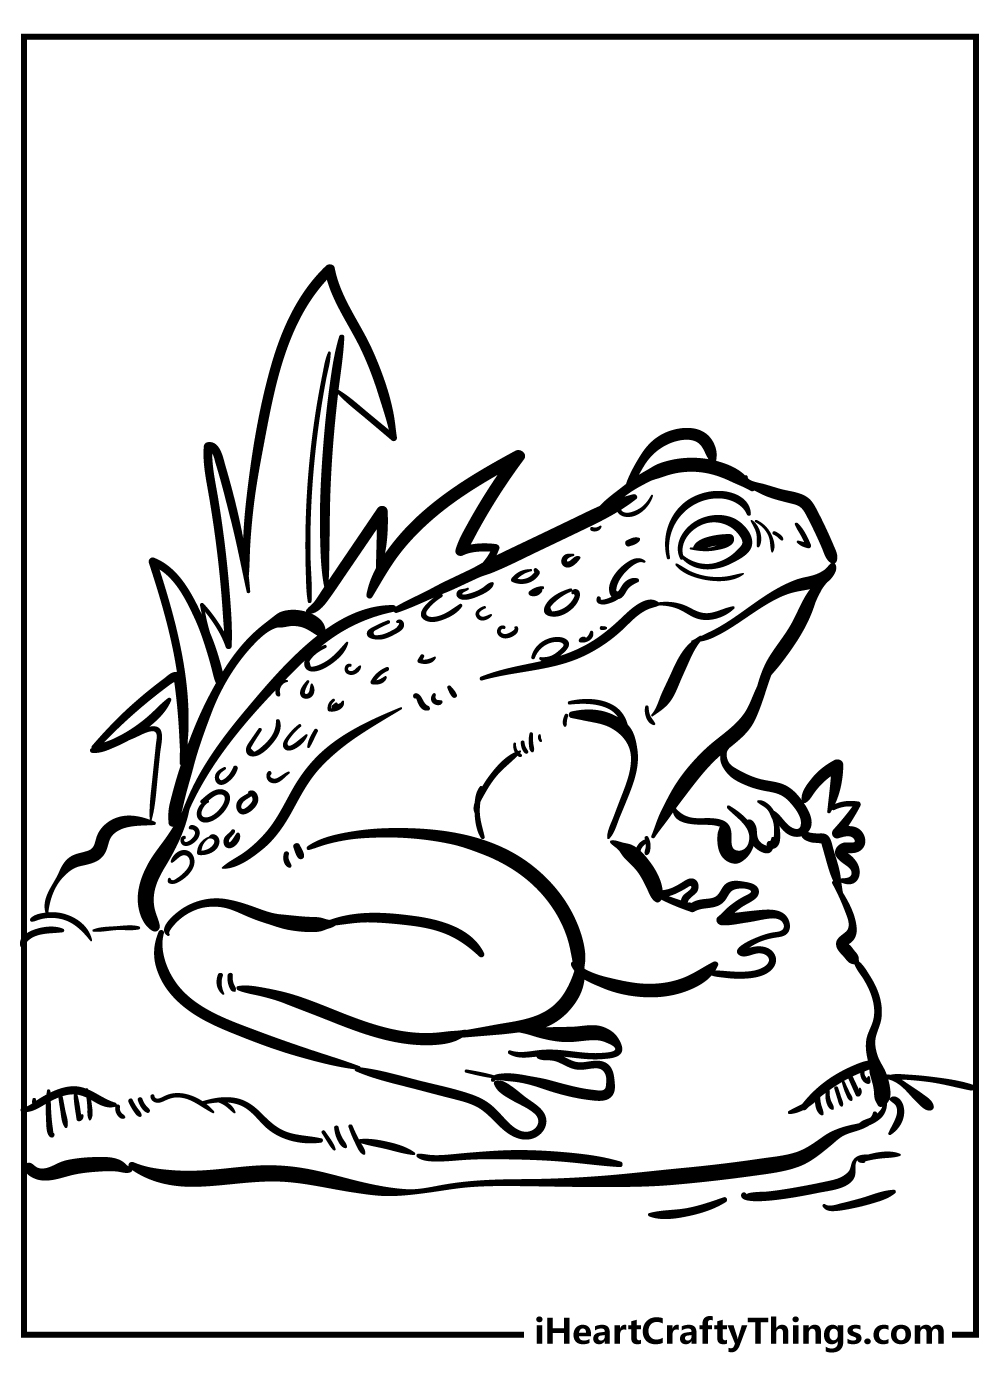 Toad Coloring Sheet for children free download